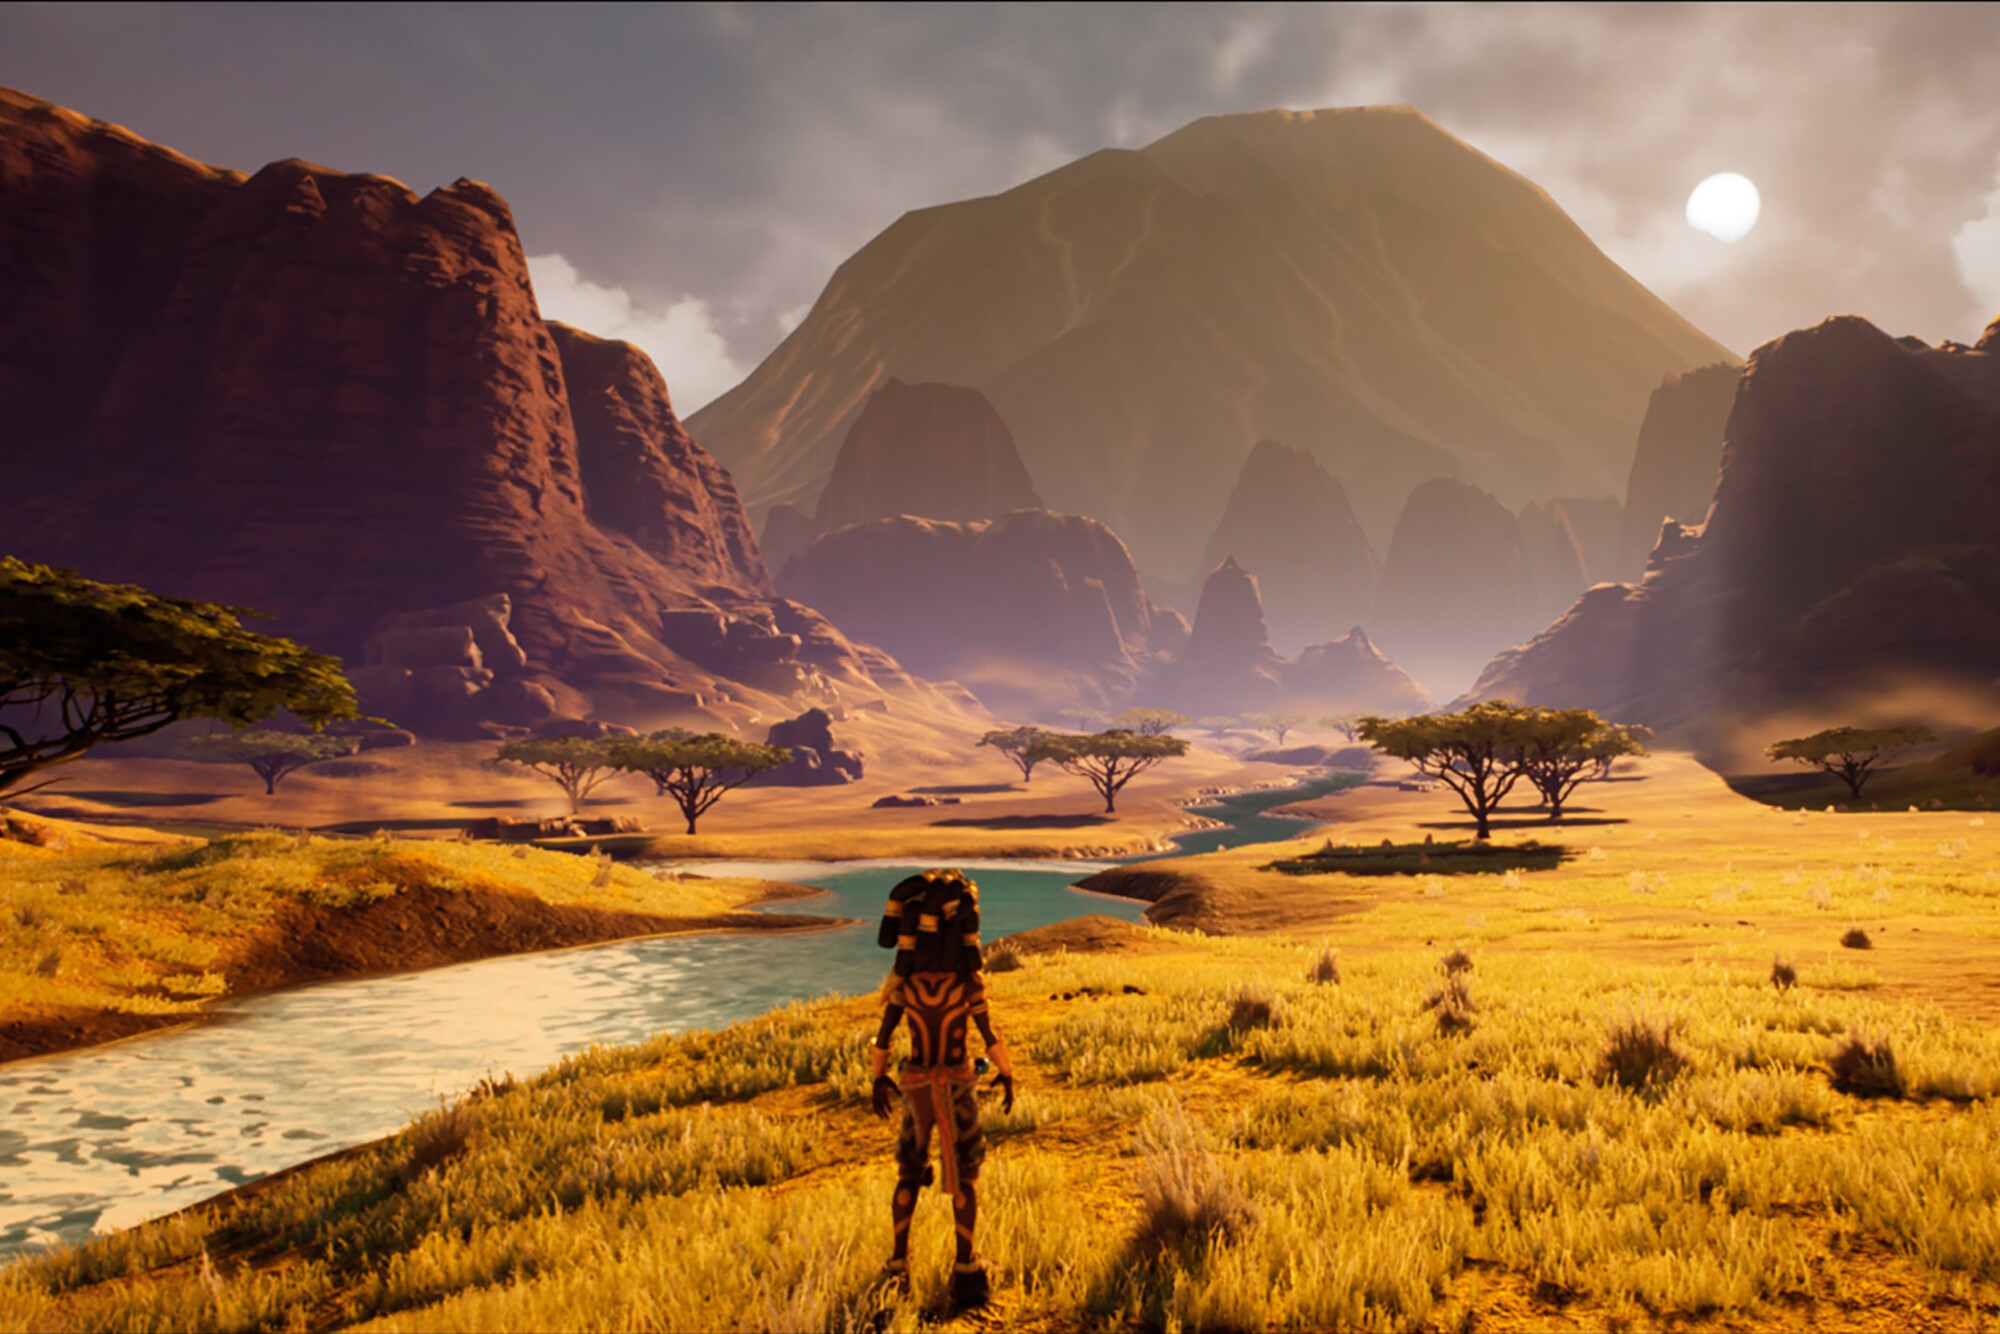 Video game rendering of a character standing by a river in a large valley surrounded by mountains.